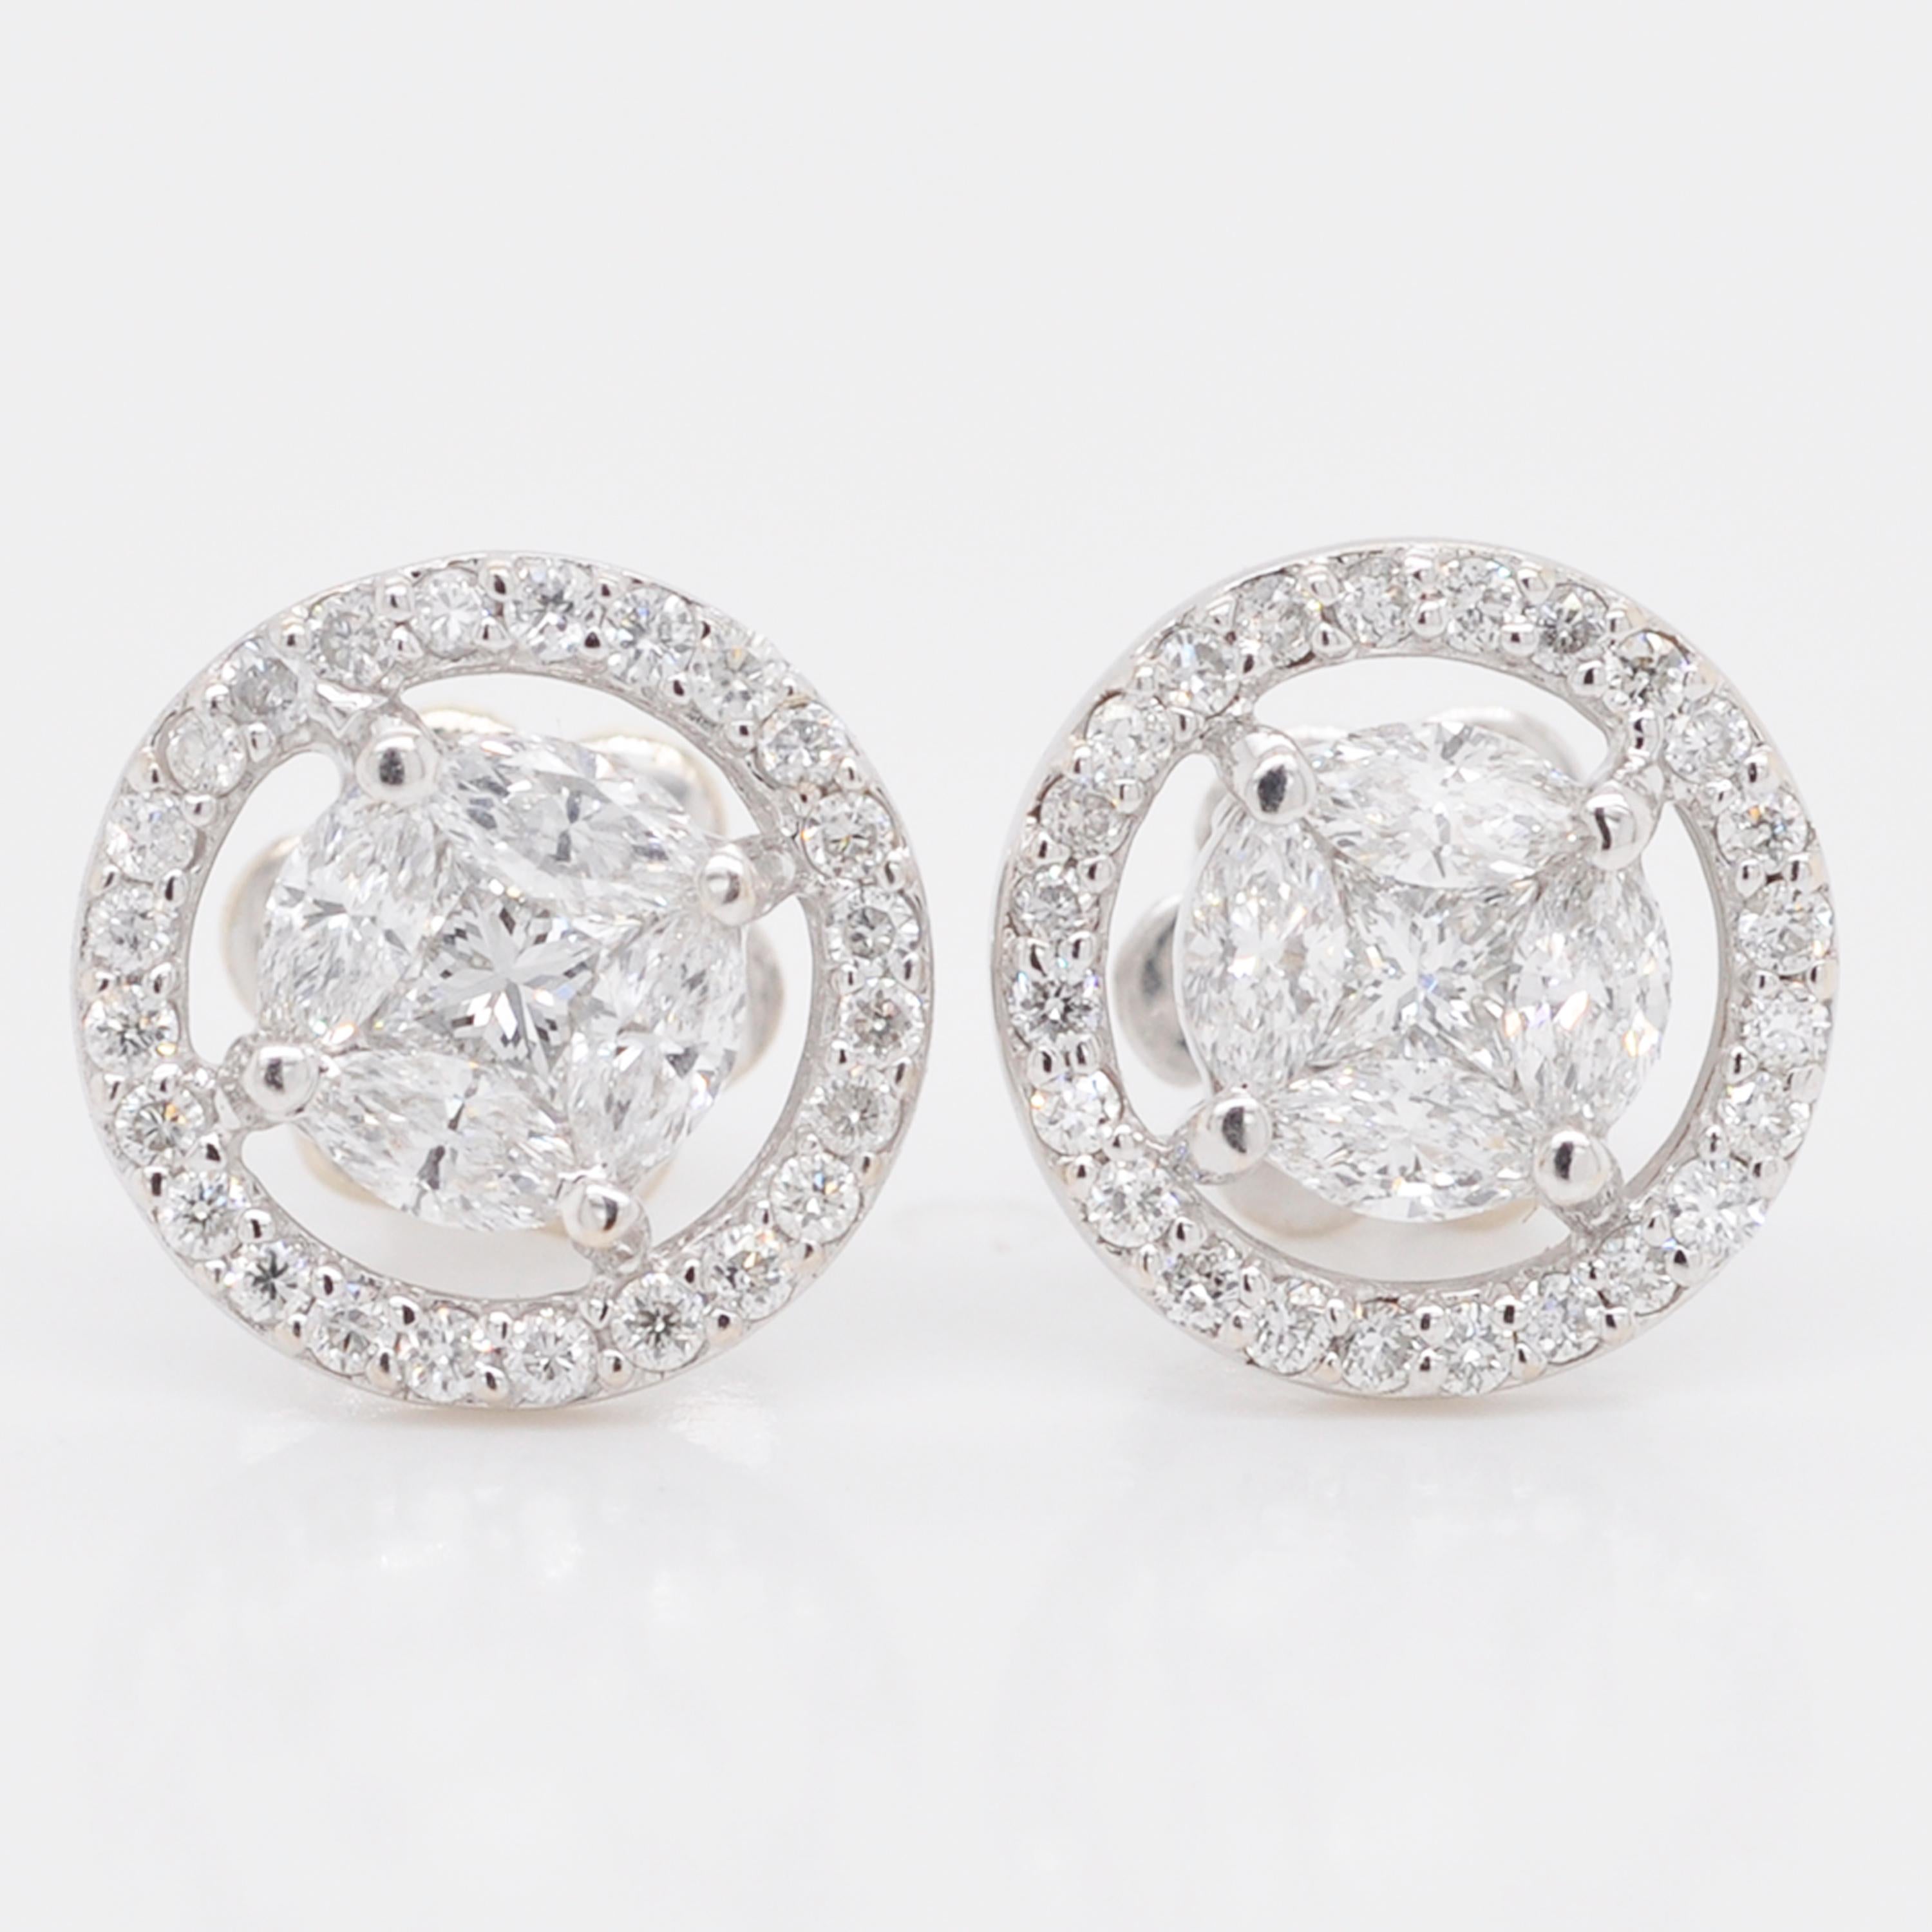 Solitaire Look Pressure Set Diamond Stud Earrings 18 Karat White Gold In New Condition For Sale In Jaipur, Rajasthan